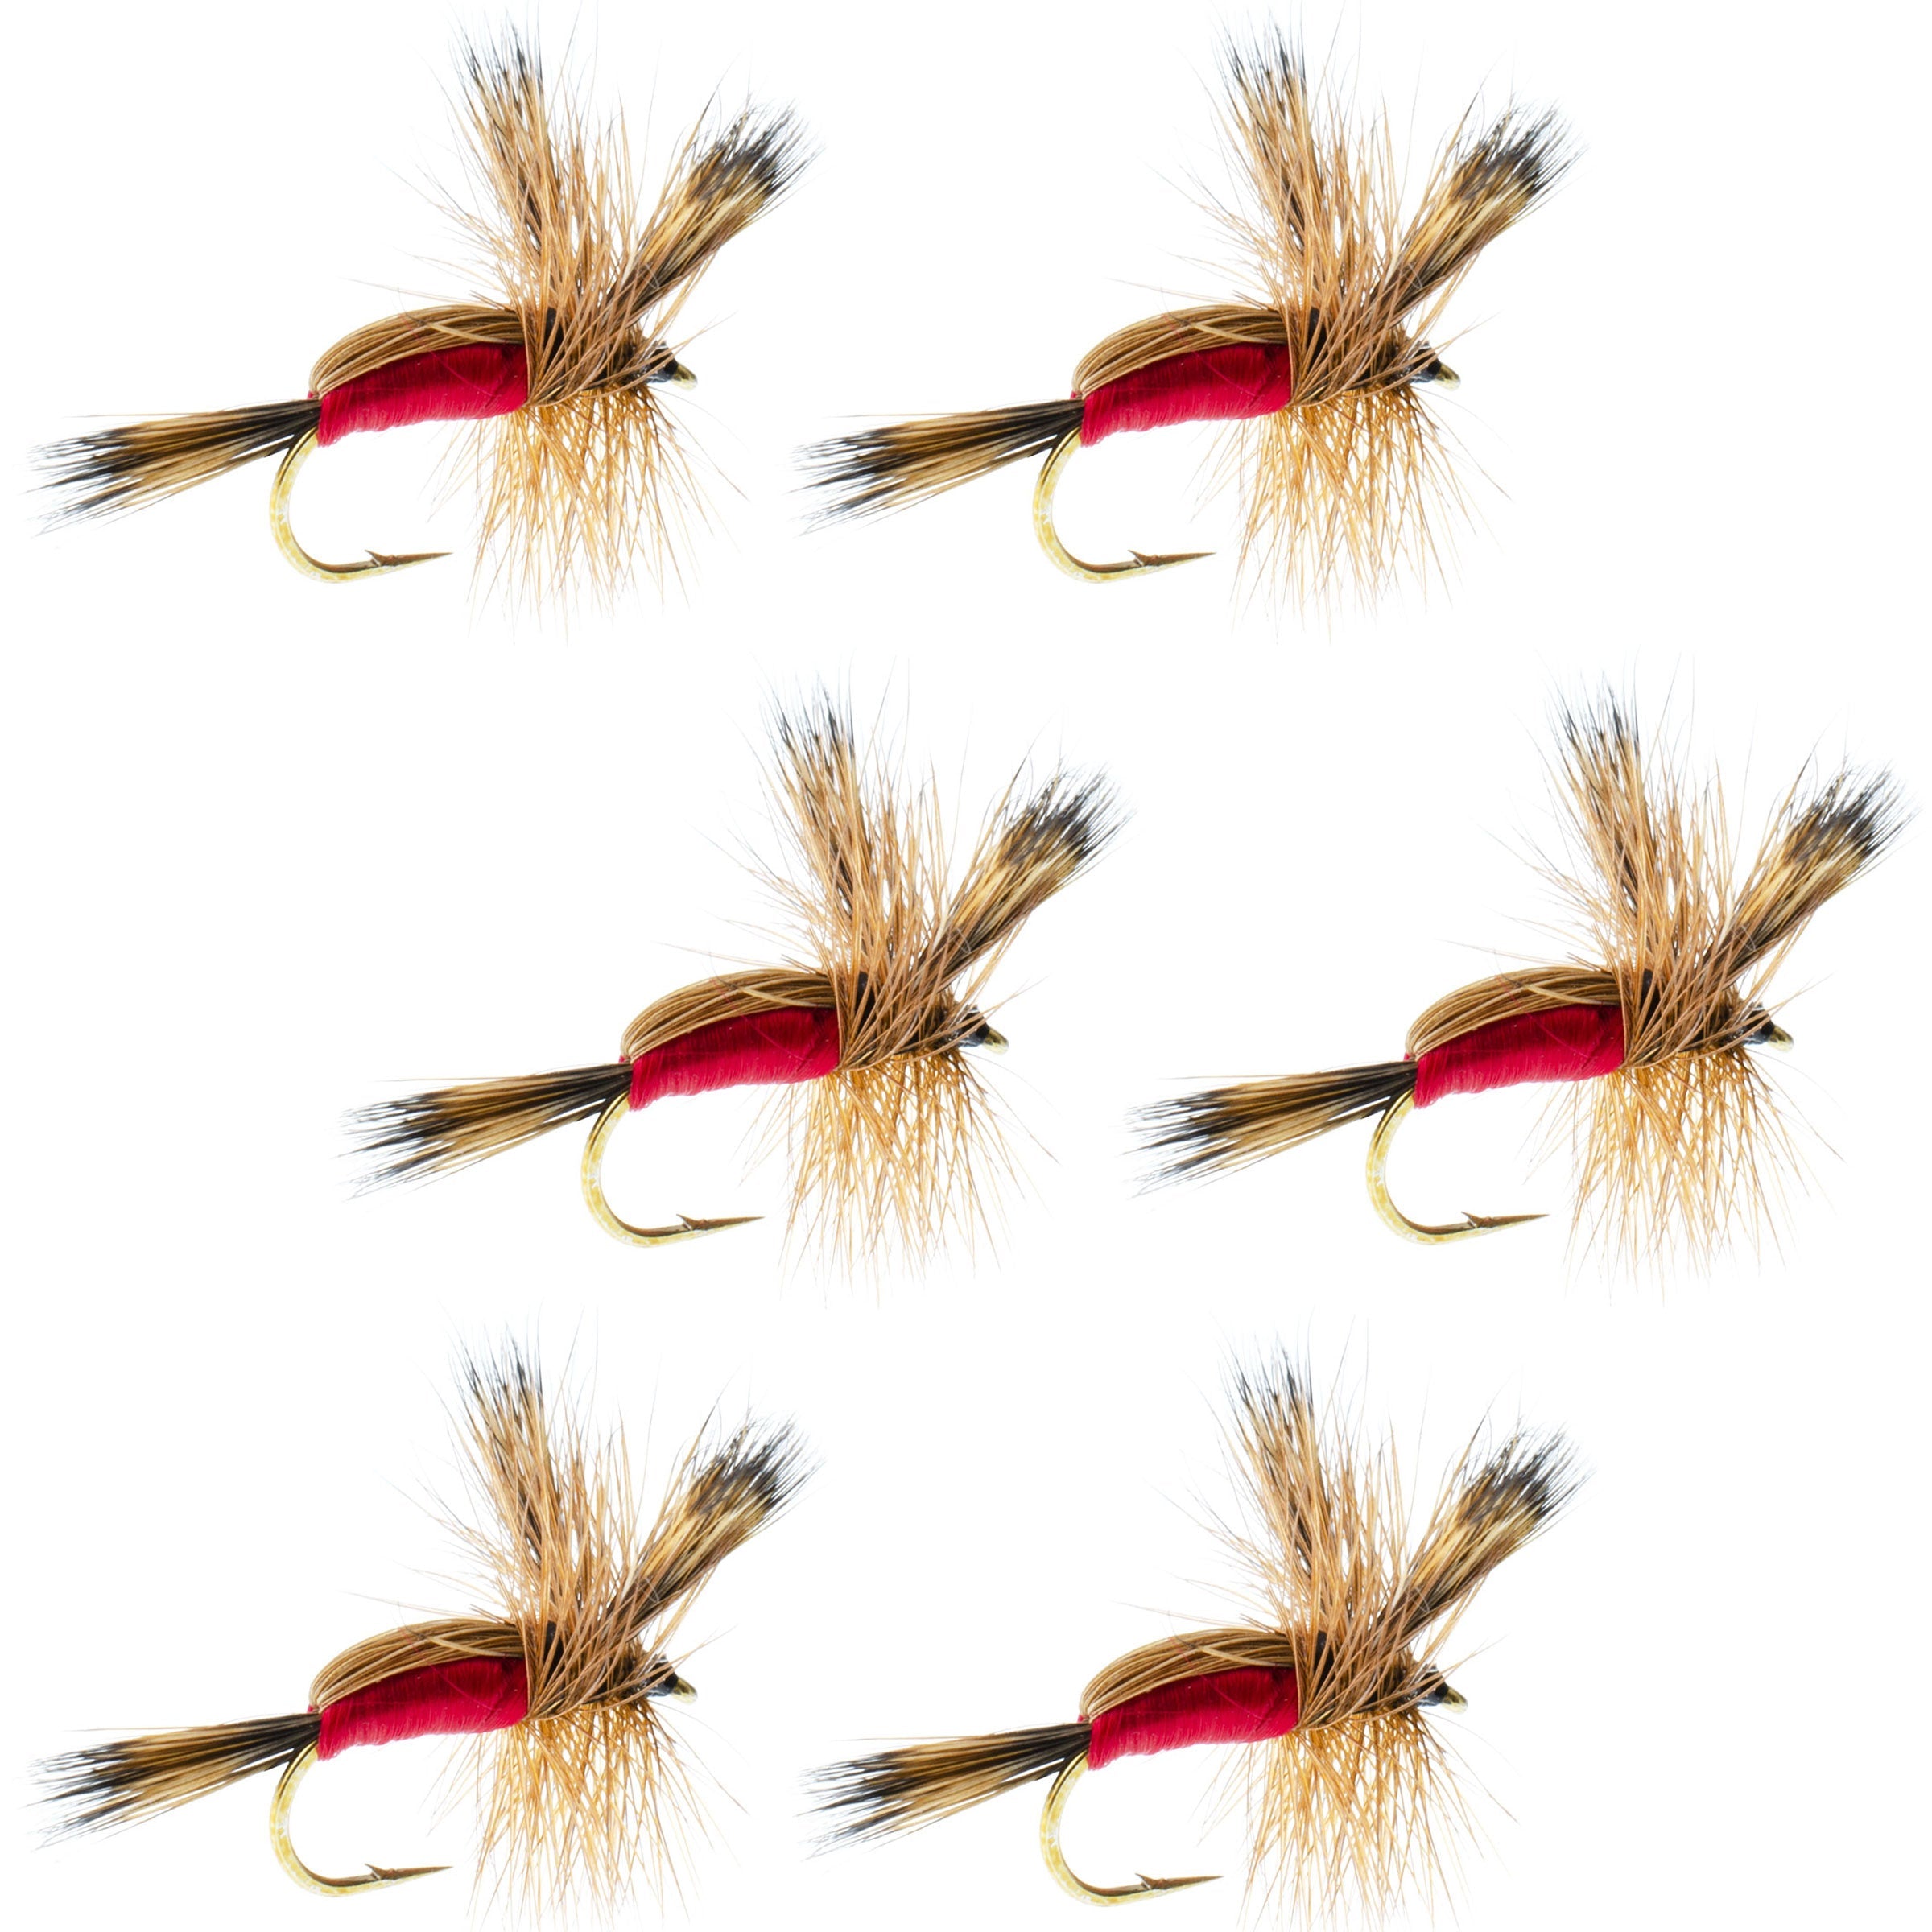 Red Humpy Classic Hair Wing Dry Fly - Anzuelo para 6 moscas, tamaño 12